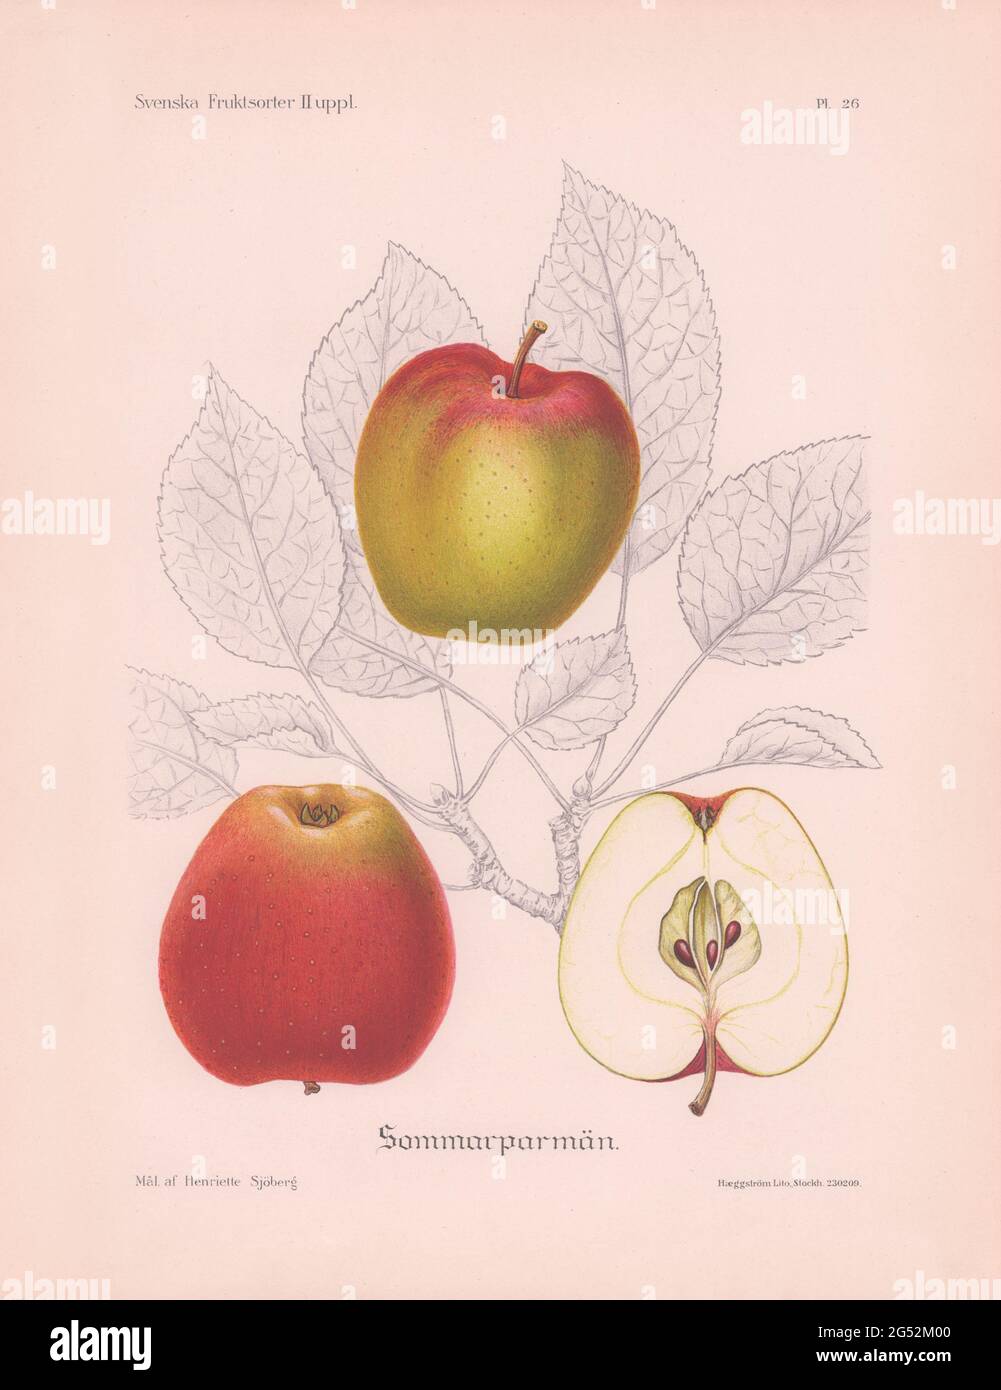 Vintage lithographic reproduction of apple variety painting by the Swedish artist Henriette Sjöberg from 1924. Stock Photo